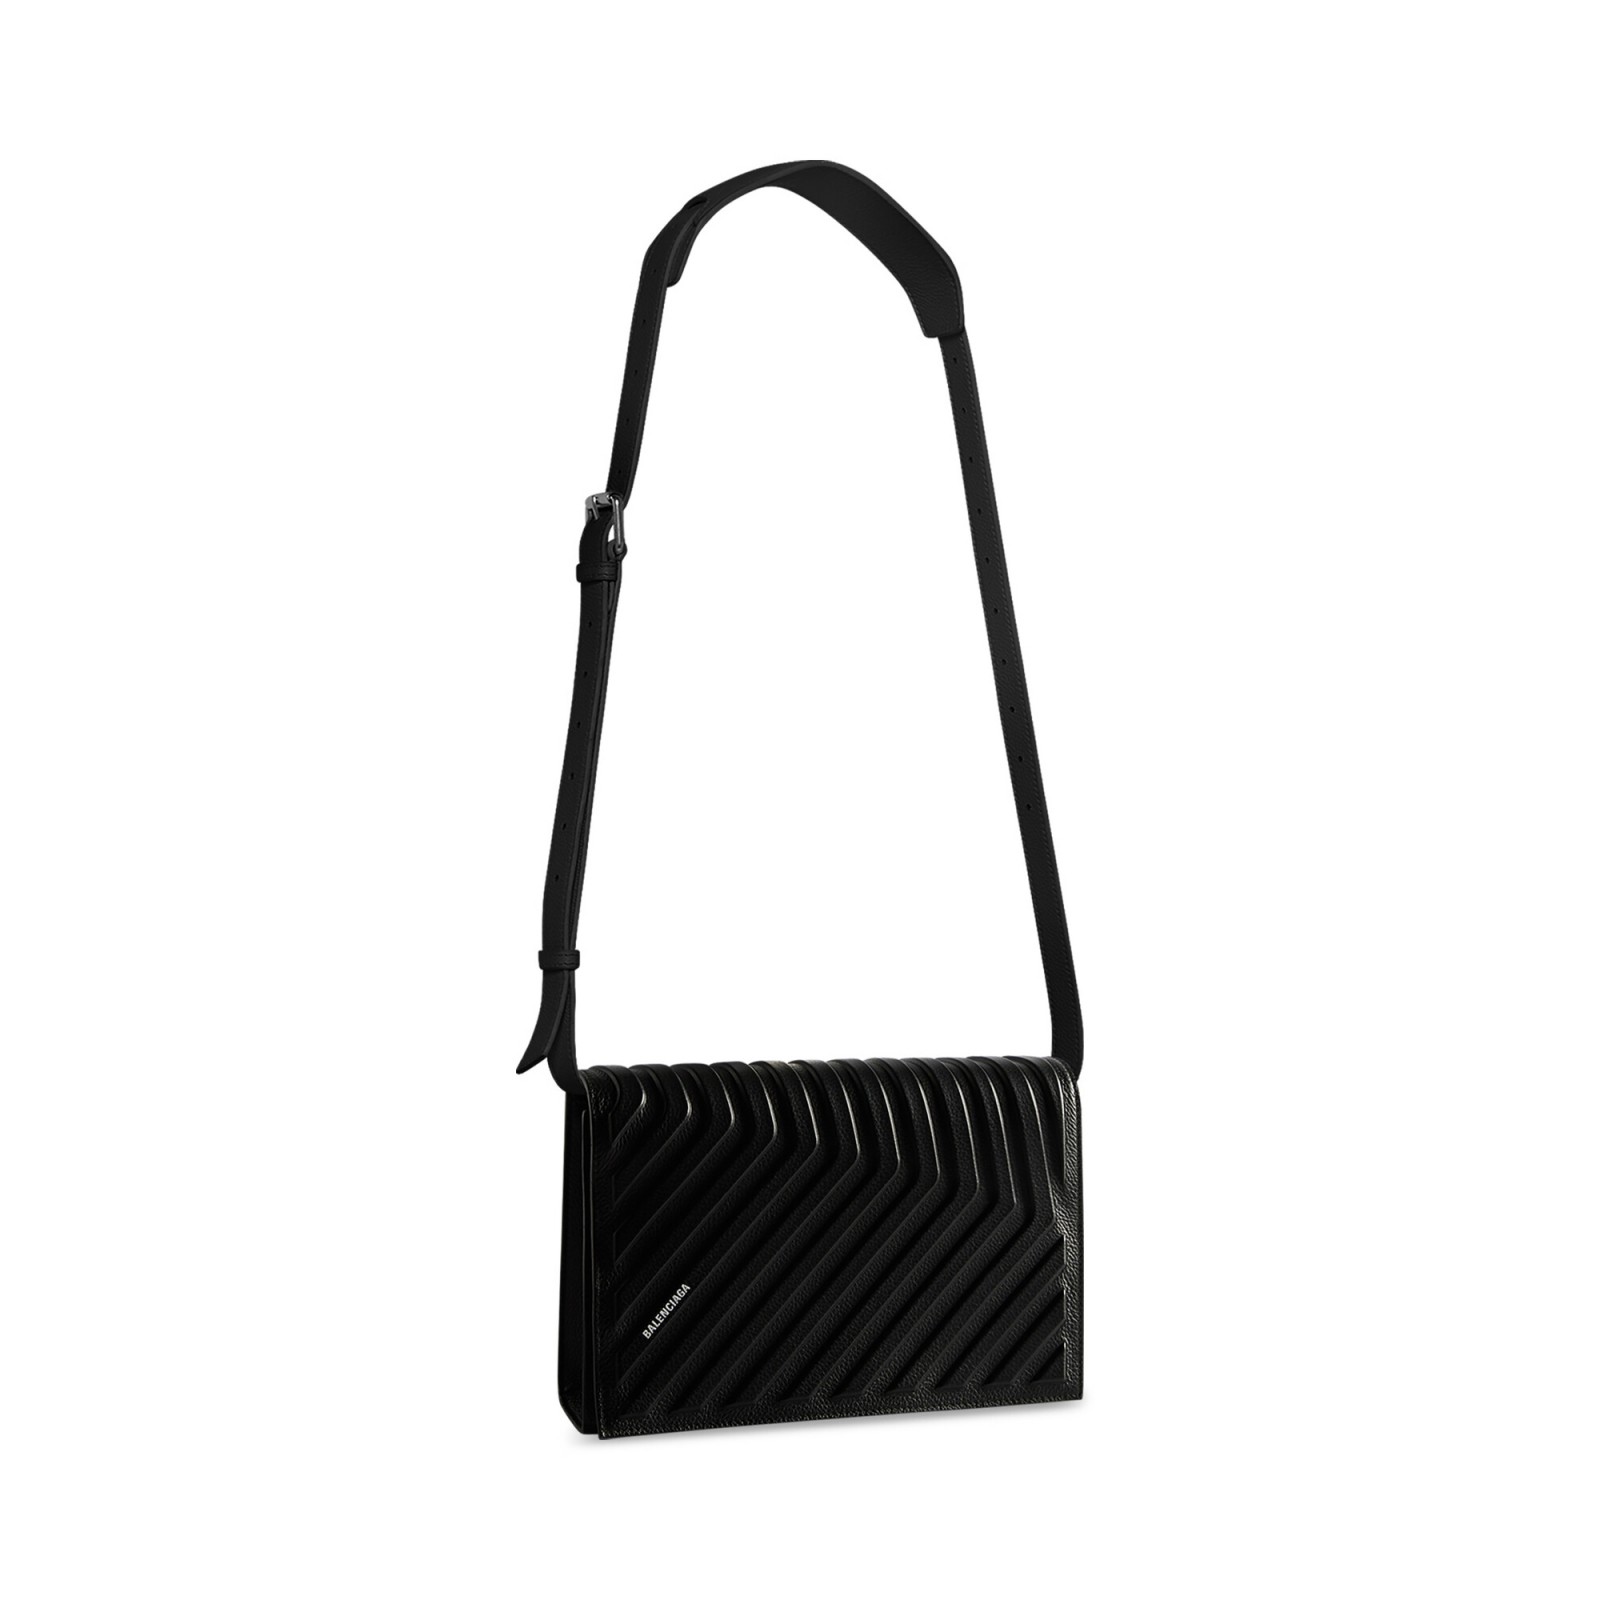 CAR FLAP BAG WITH STRAP